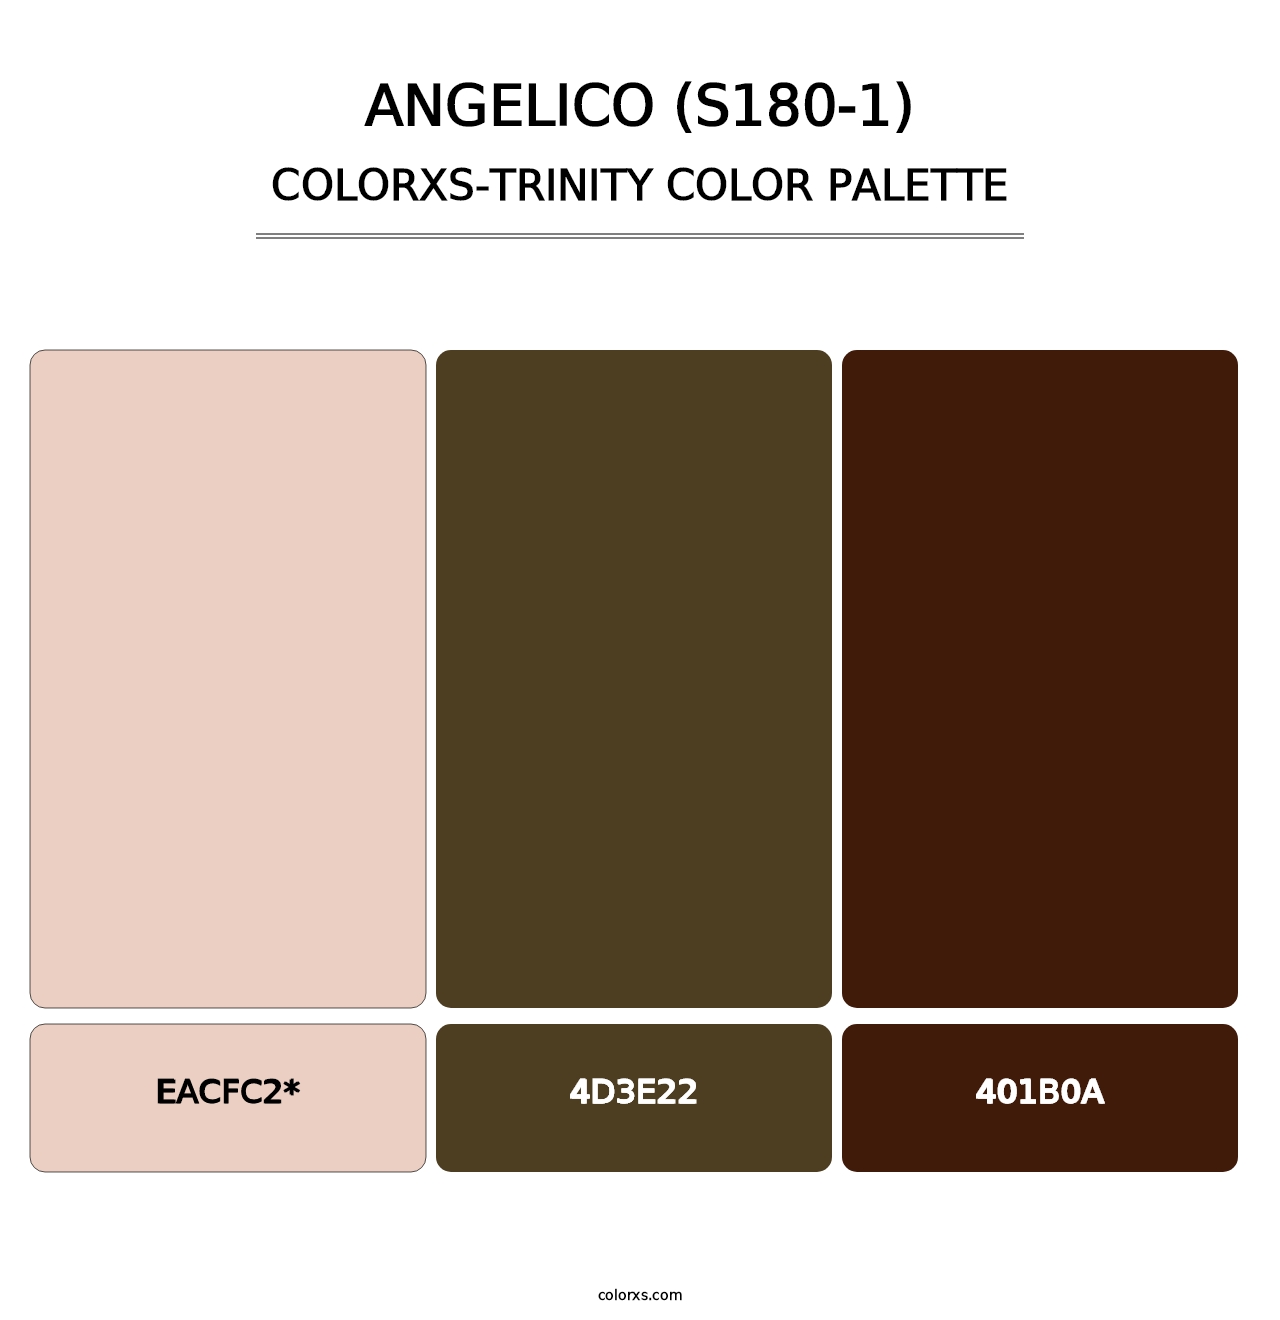 Angelico (S180-1) - Colorxs Trinity Palette